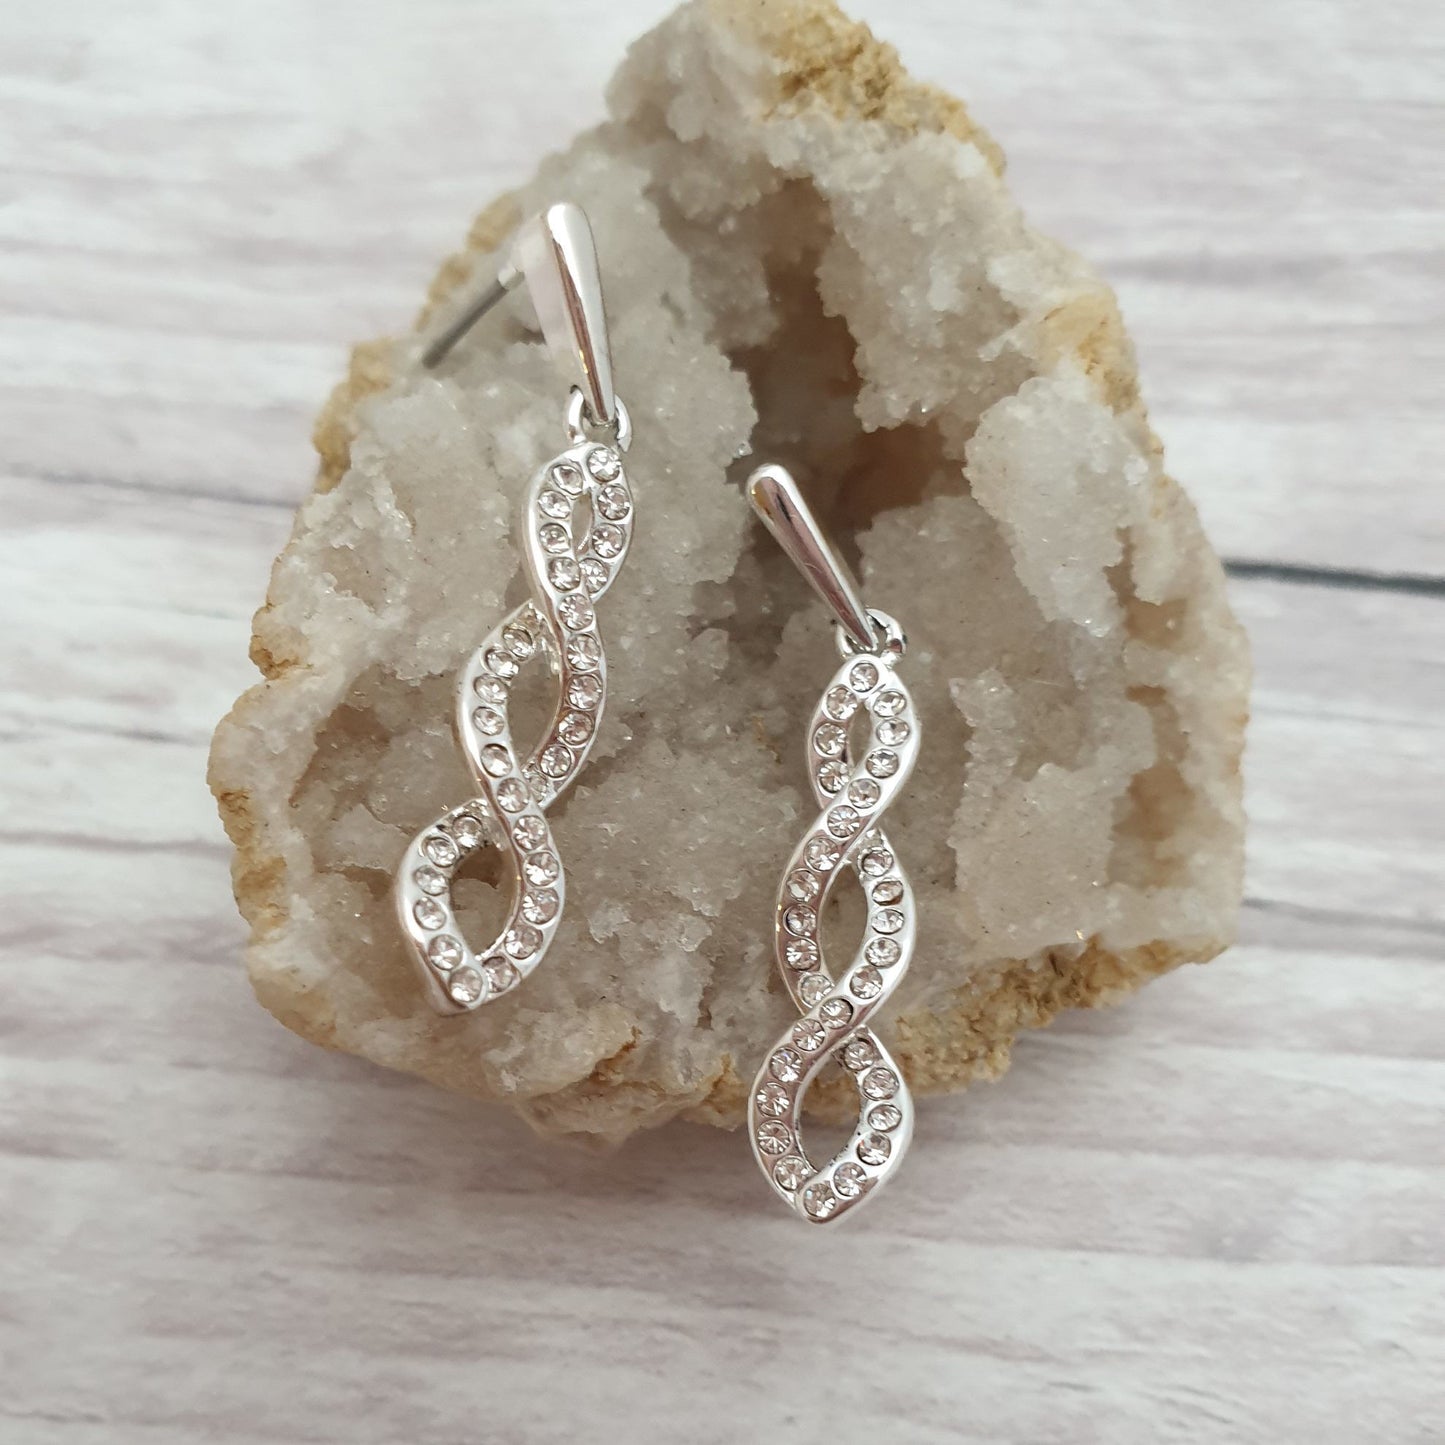 Photo of a pair of long drop earrings with a 3 loop twist set with diamante crystals